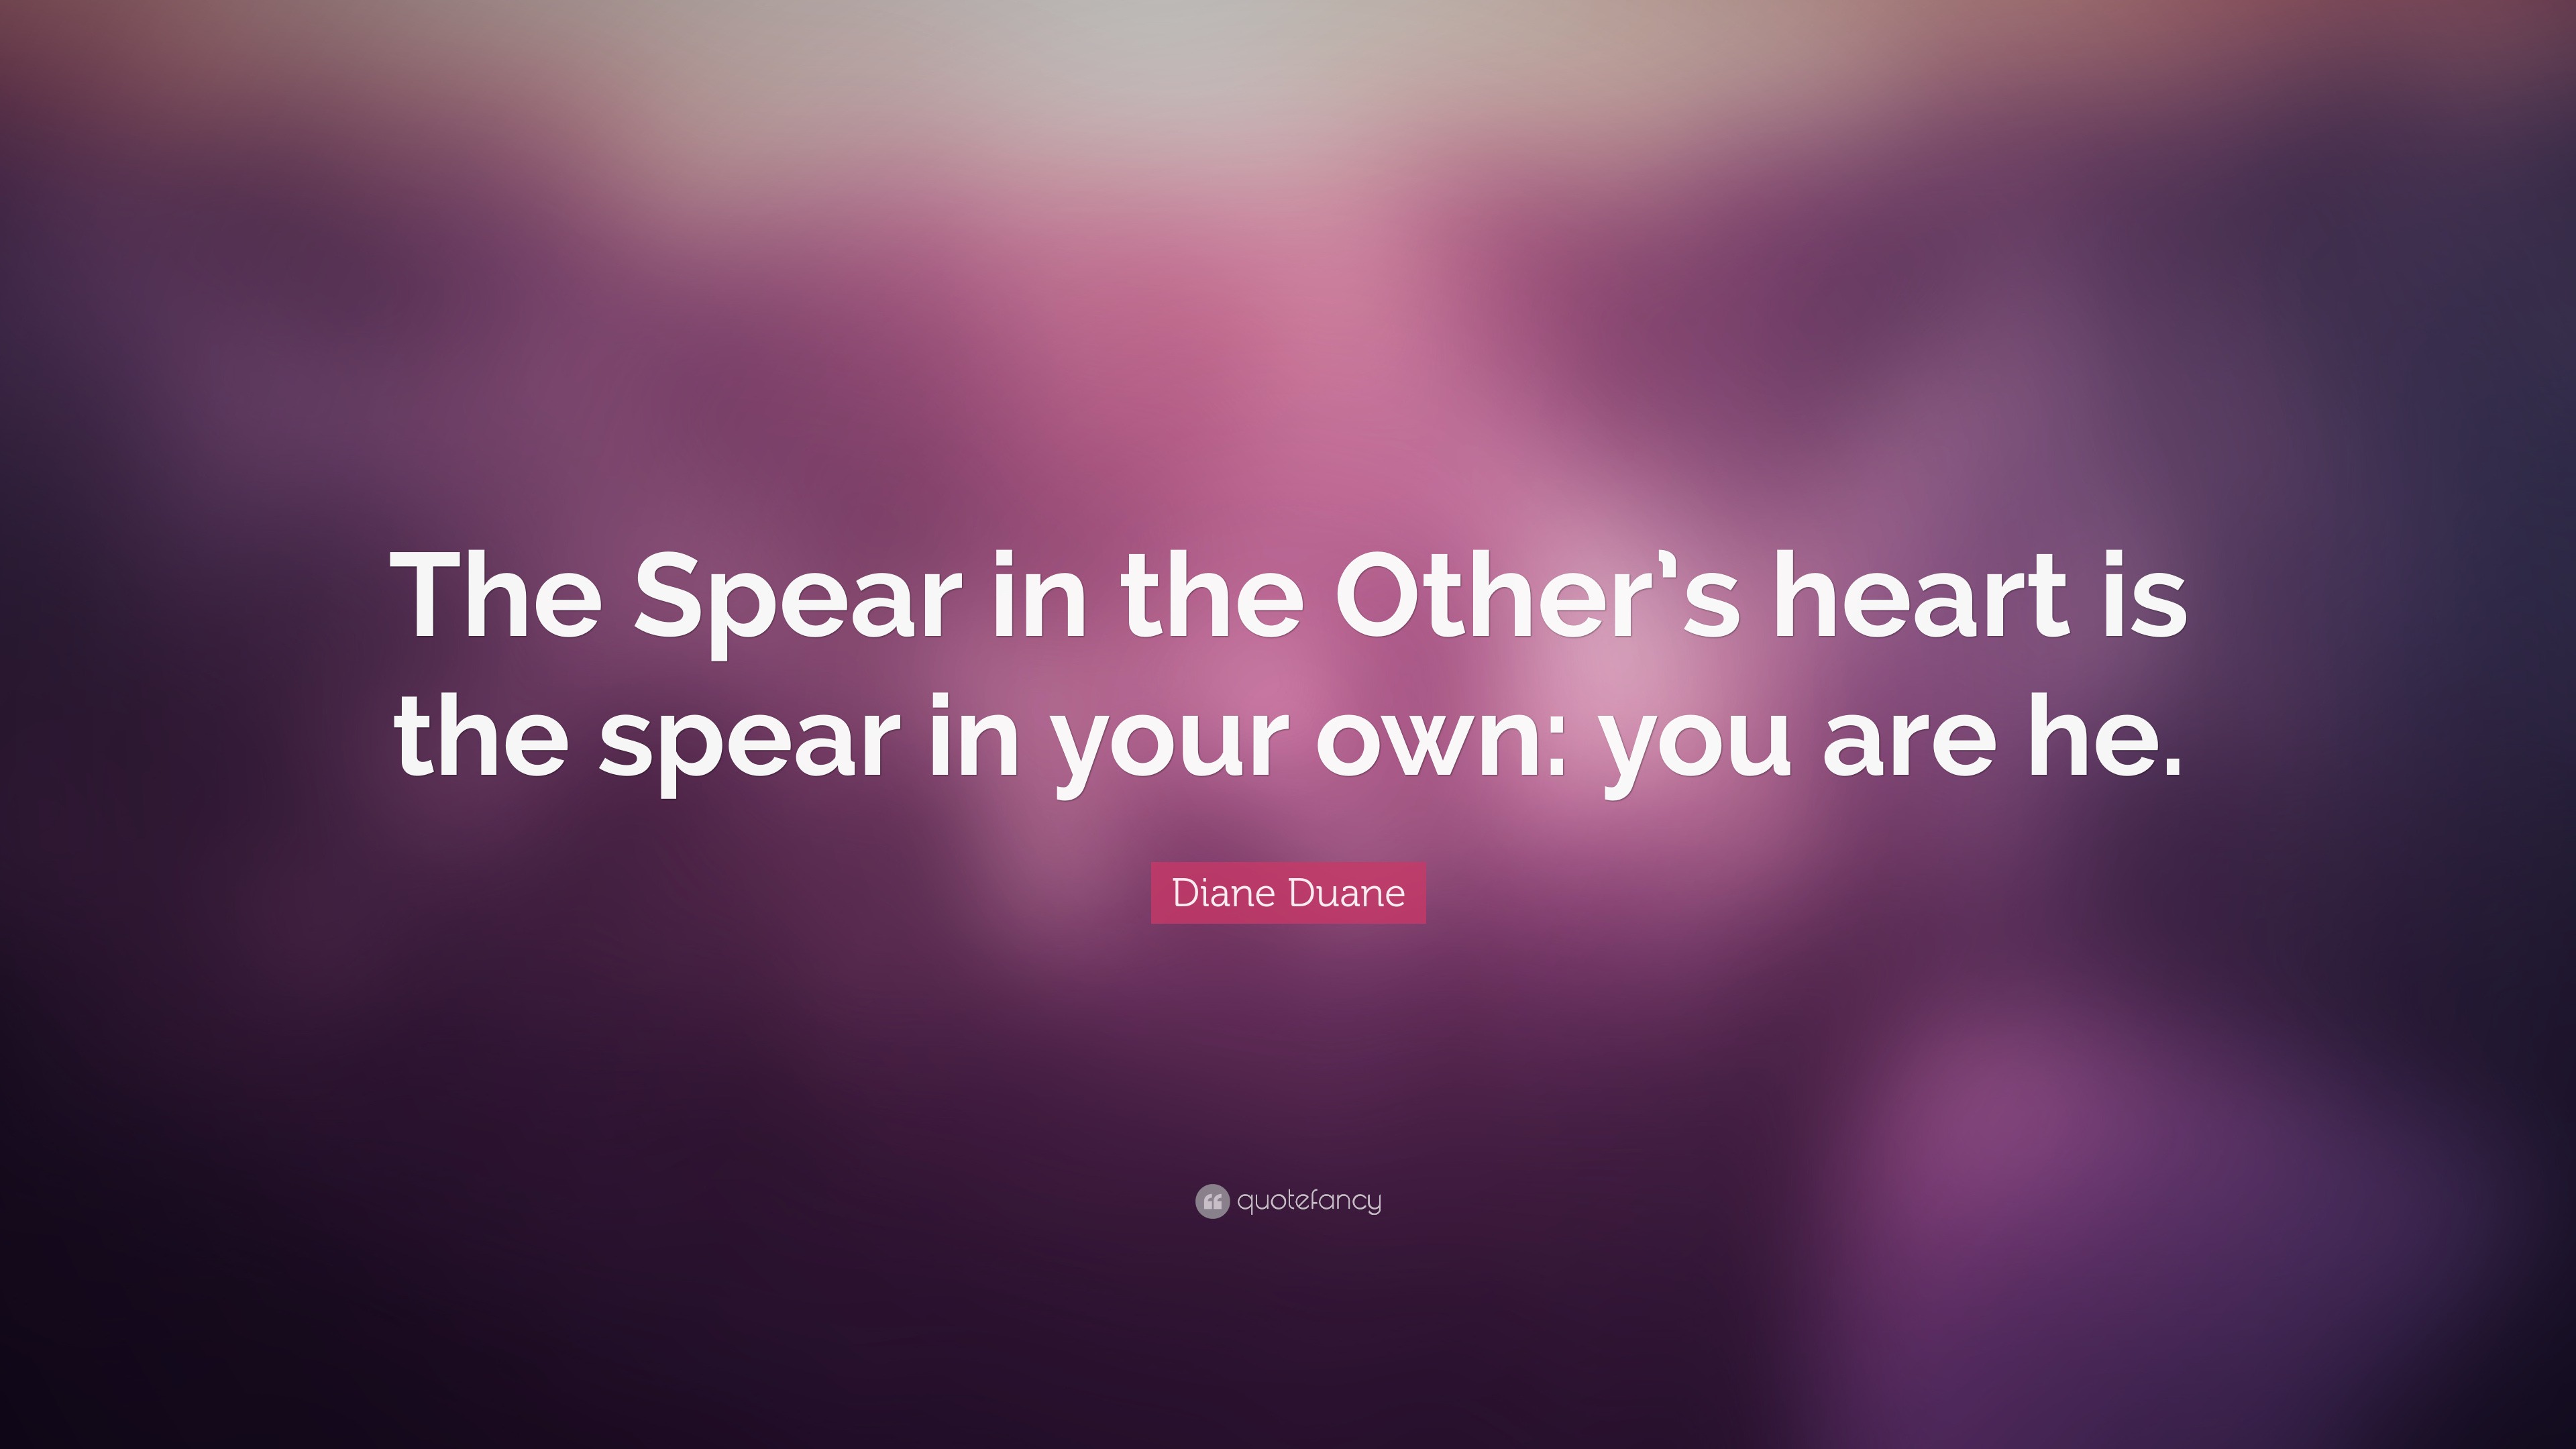 Diane Duane Quote: “The Spear in the Other’s heart is the spear in your ...